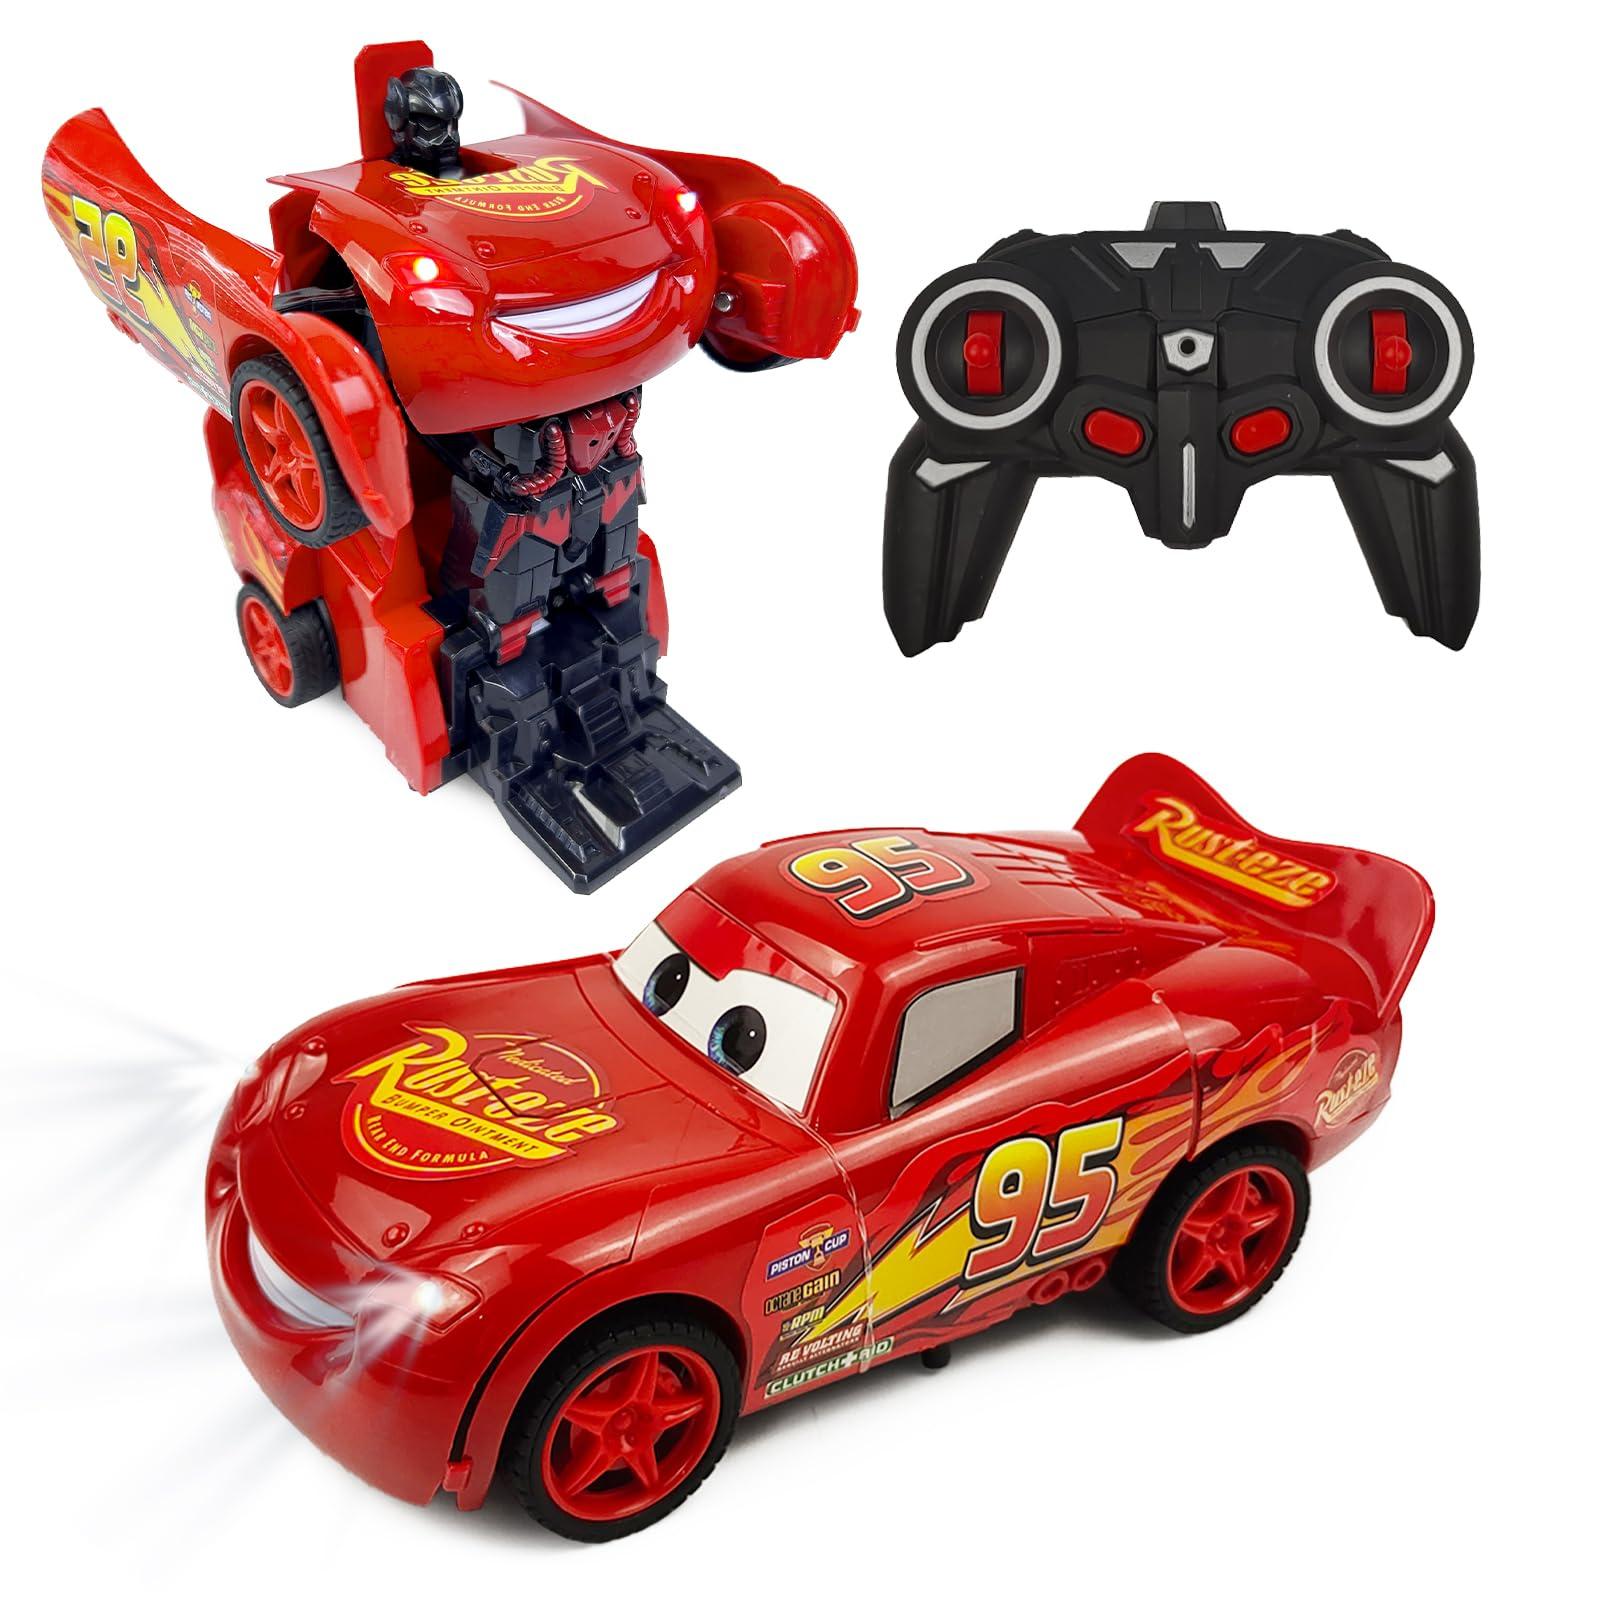 Rc Lightning Mcqueen: Positive Reviews and Bundle Deals - The Appeal of RC Lightning McQueen 